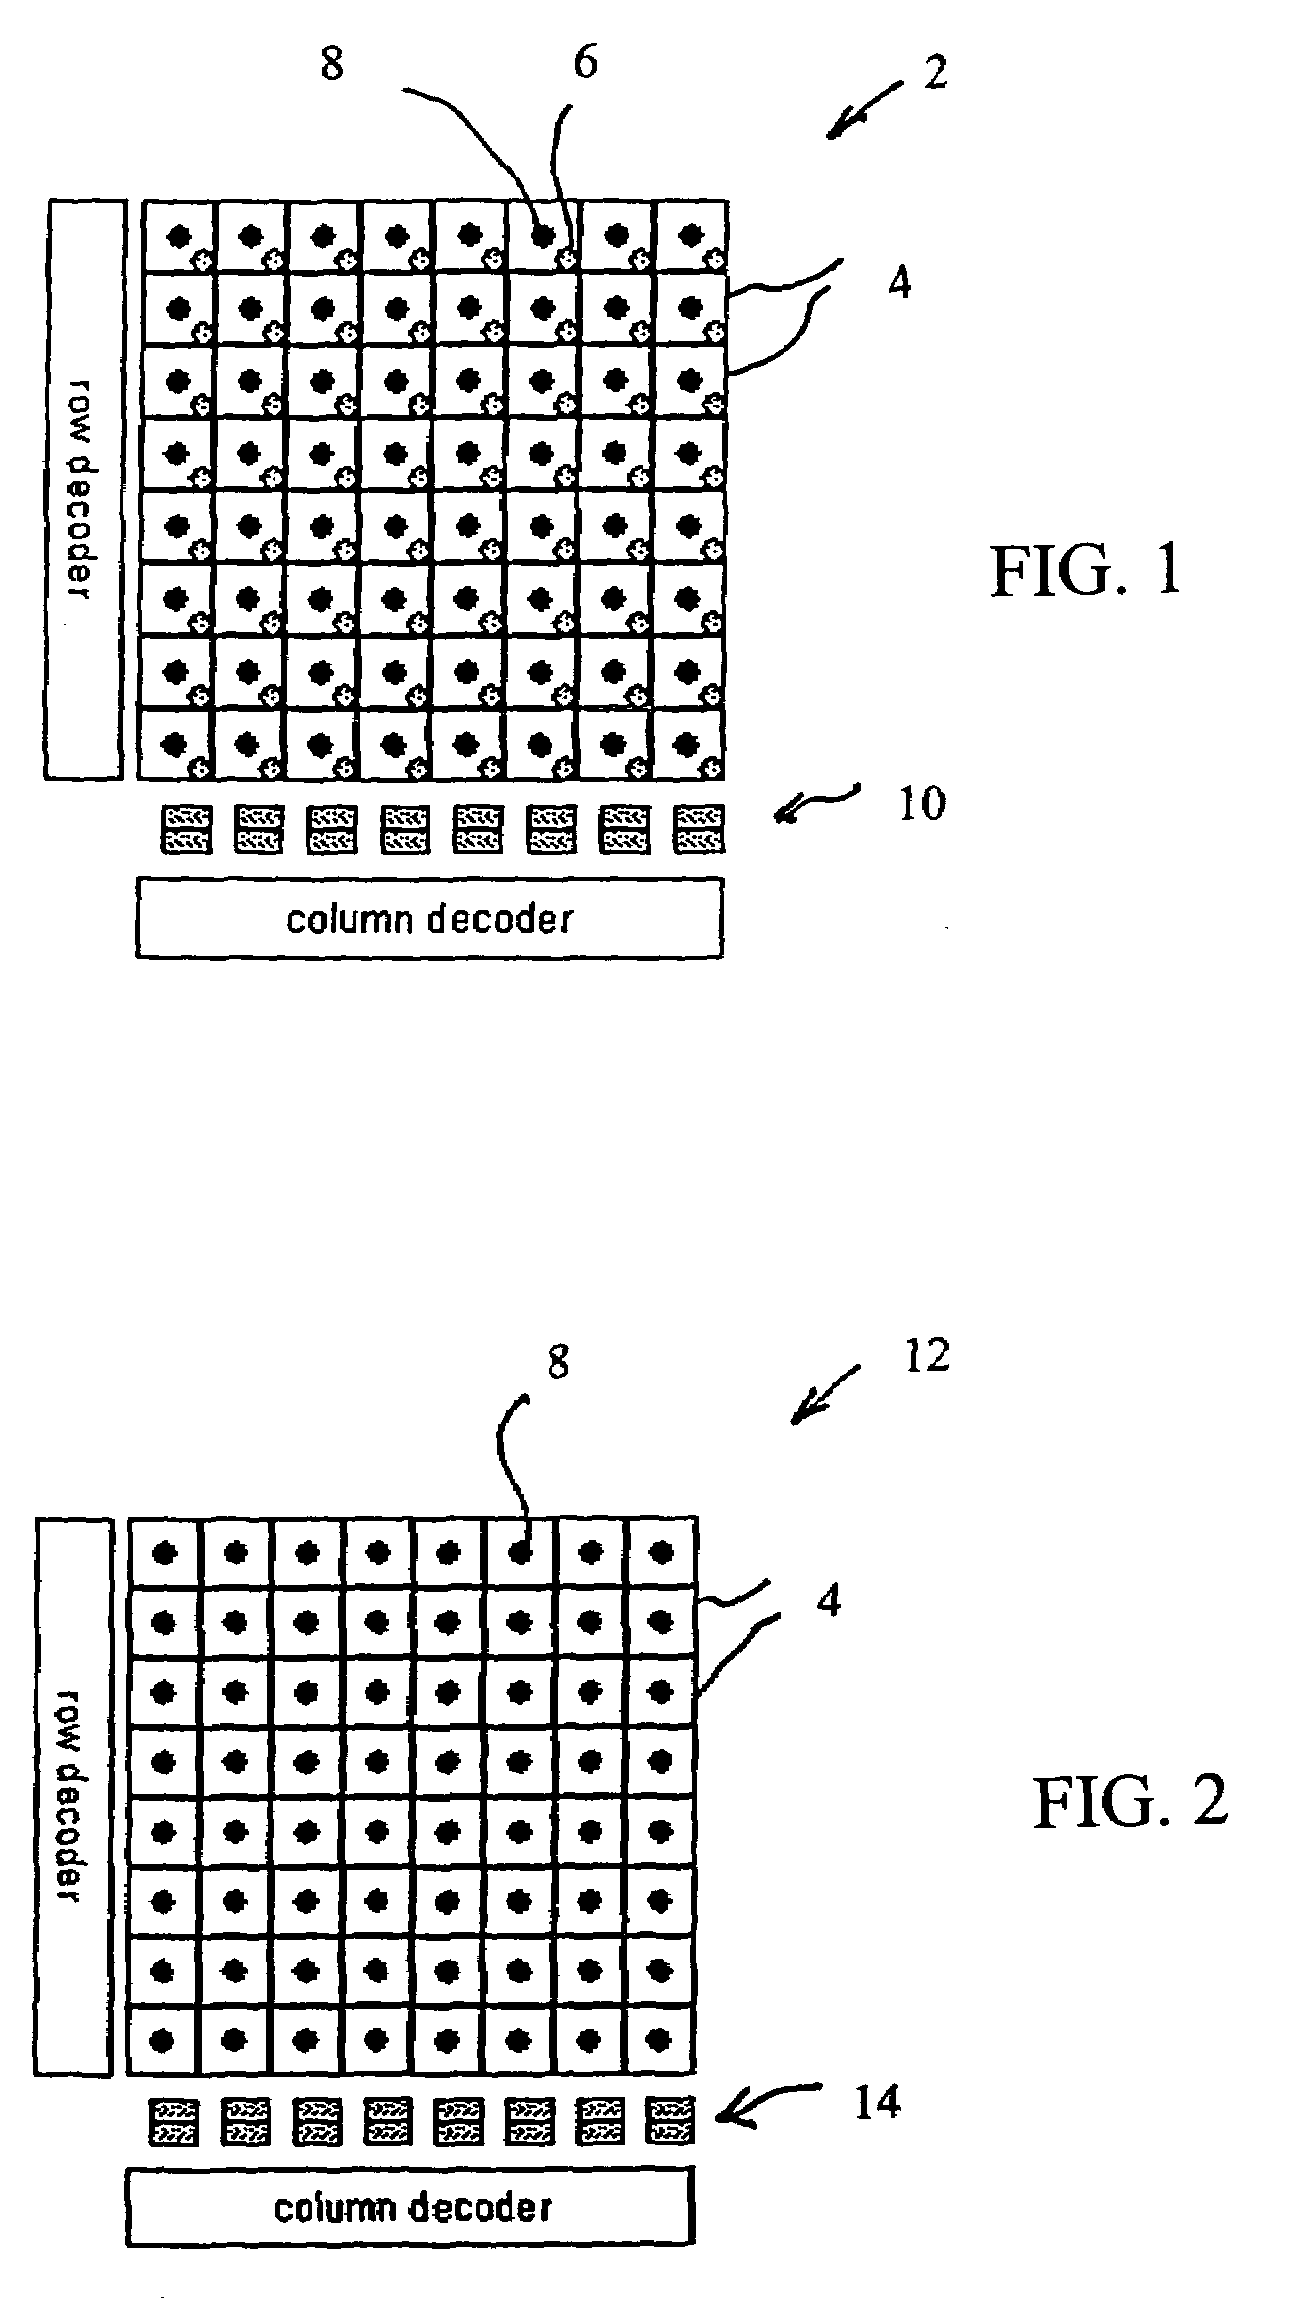 Frame-shuttered CMOS image sensor with simultaneous array readout